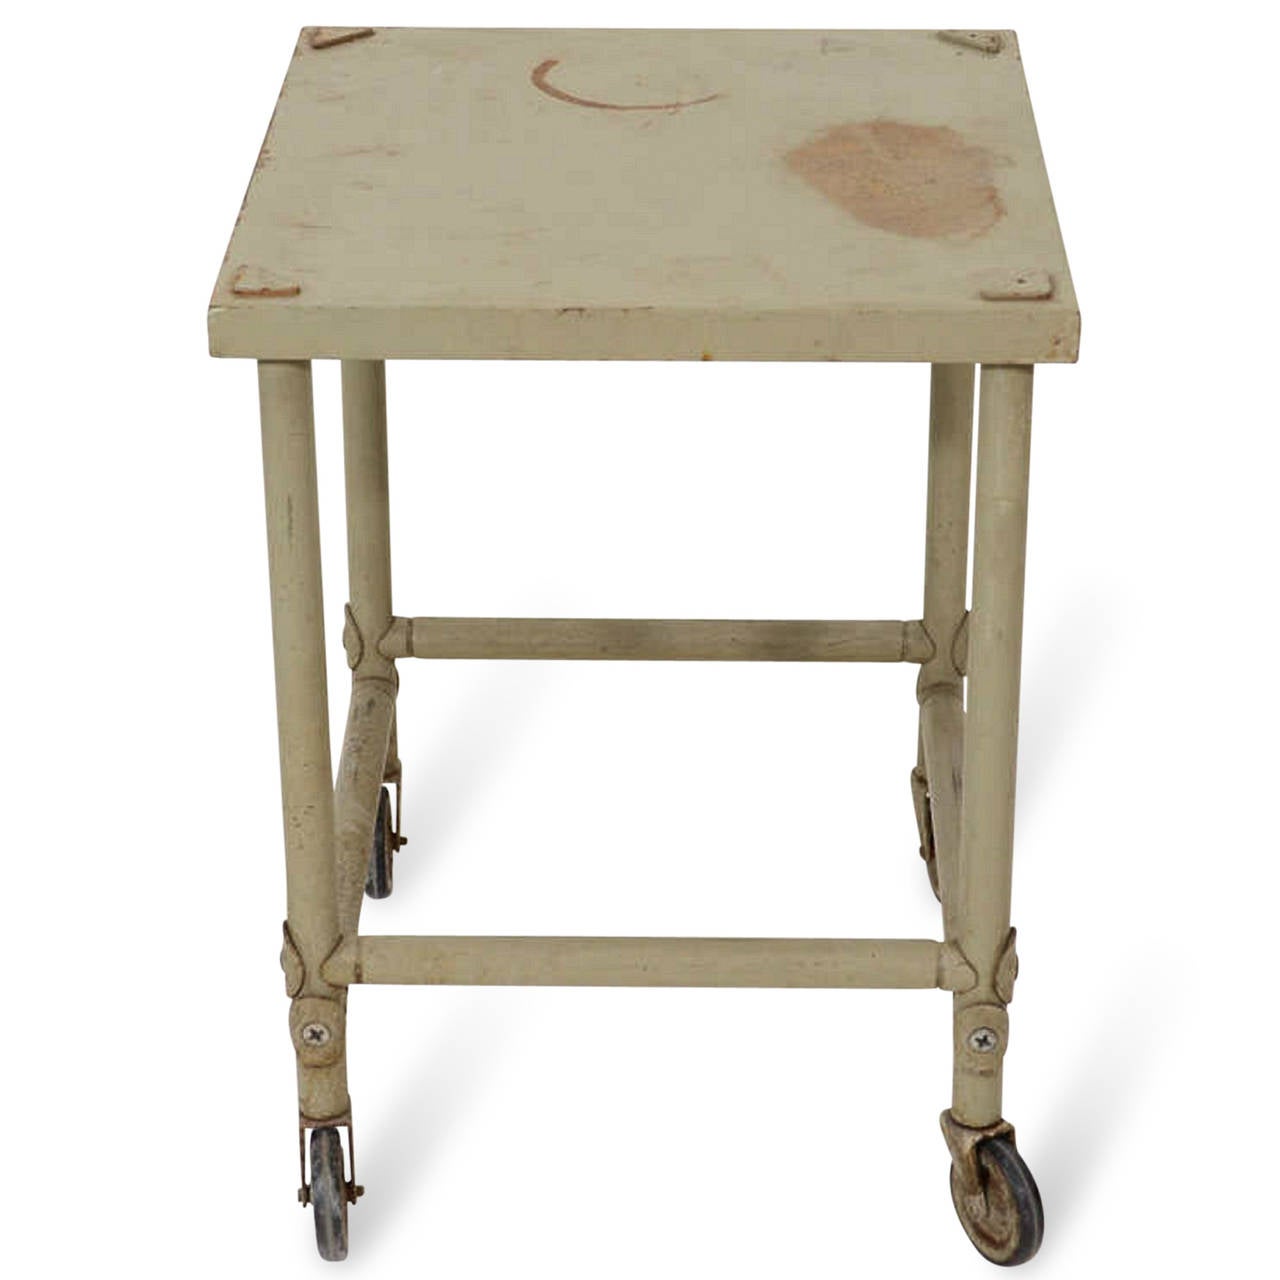 White painted, steel cart on castors by Rene Herbst, French, 1940s. 19 in square, height 24 in. 

Note: Original paint shows fading and losses.

WINTER SALE - 40% OFF - One Week Only !!

(Price shown is reduced price, no further trade